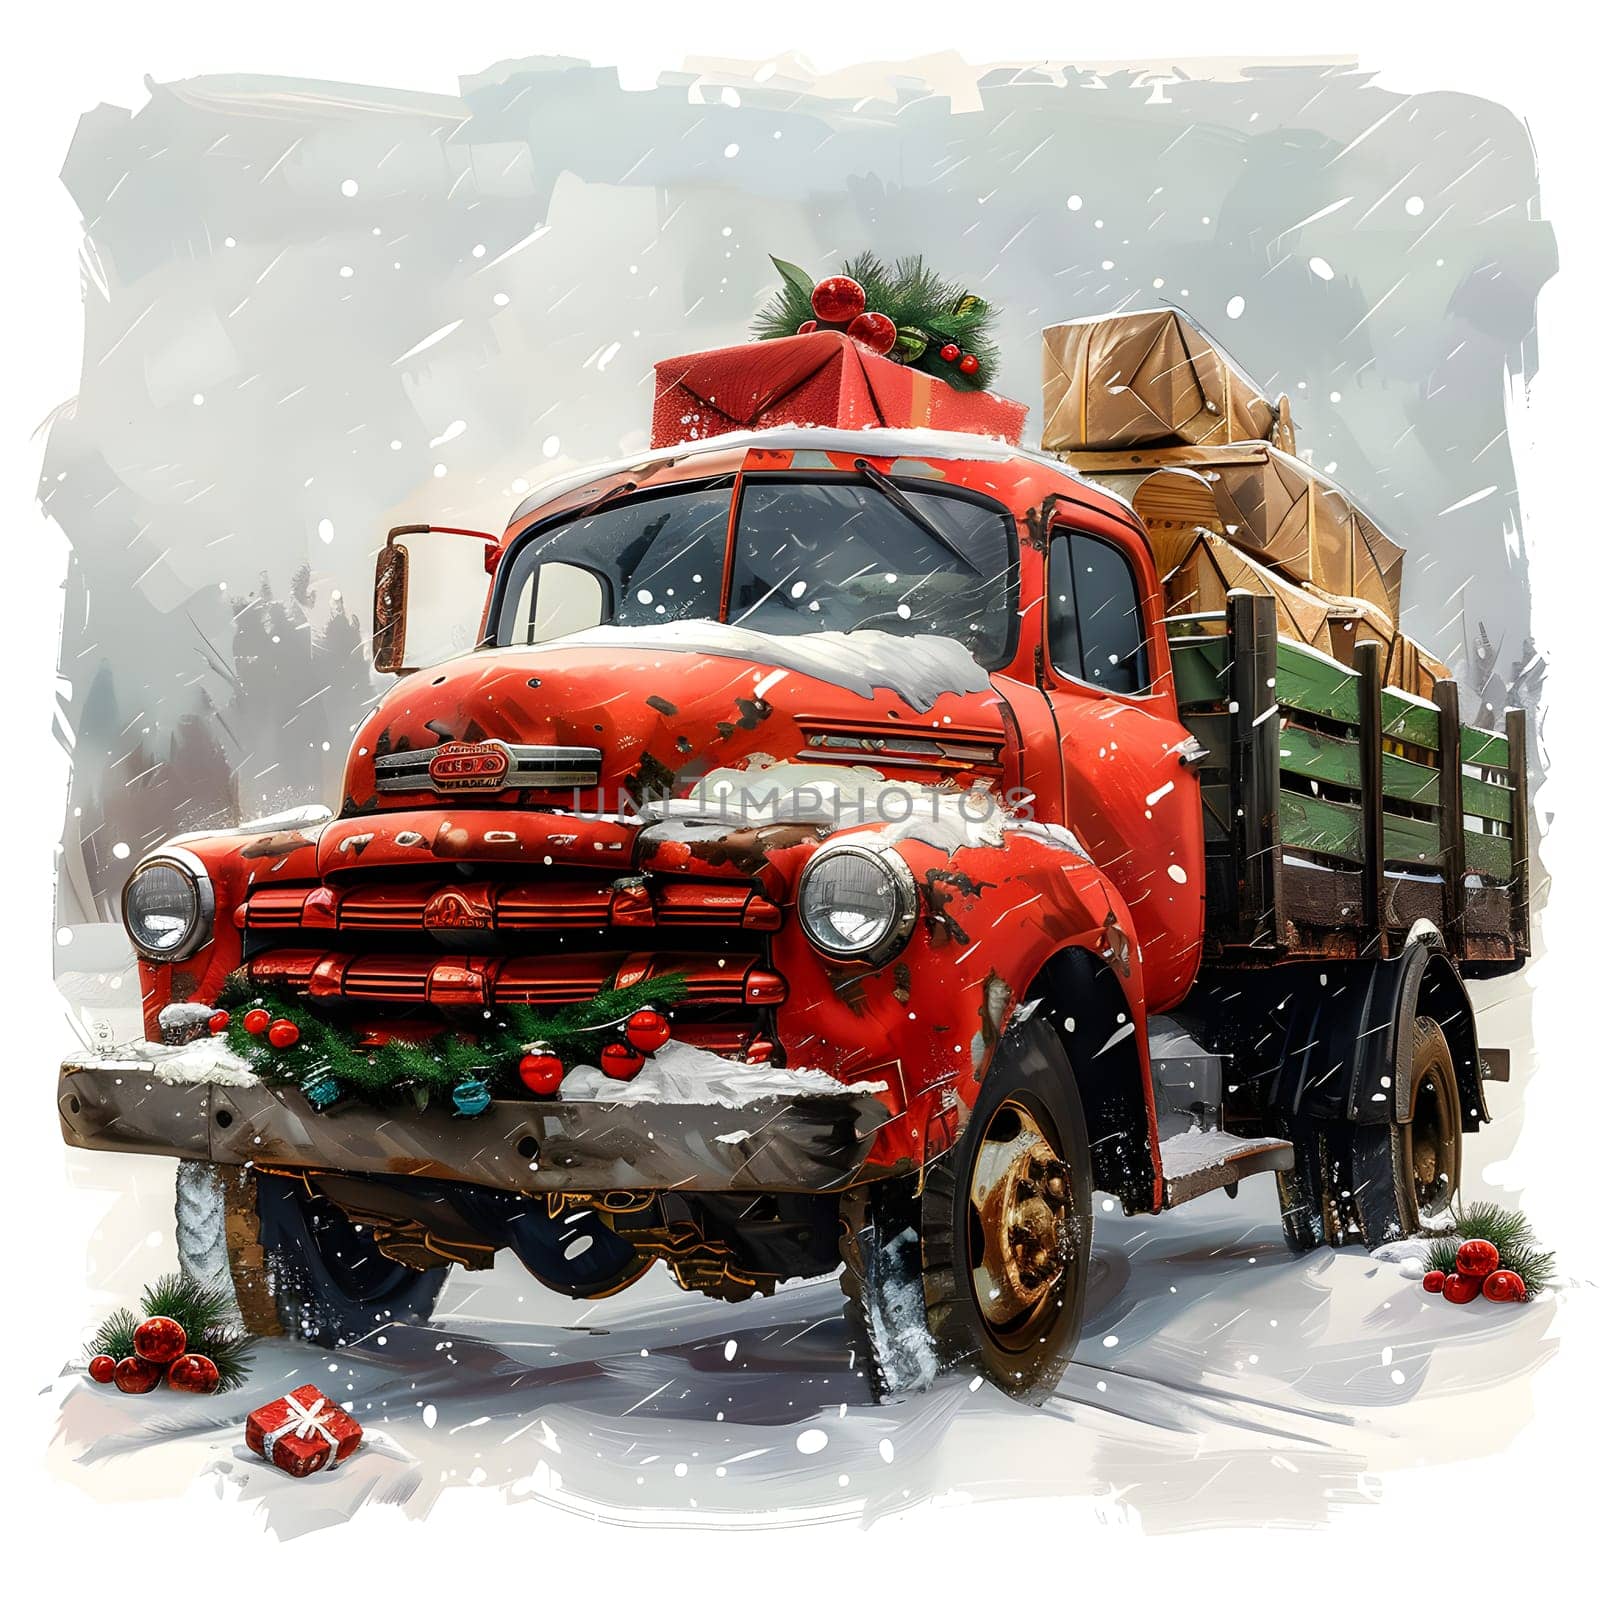 A red motor vehicle with Christmas presents in the back is parked in the snowy landscape. The vehicles hood, grille, and bumper are covered in snow